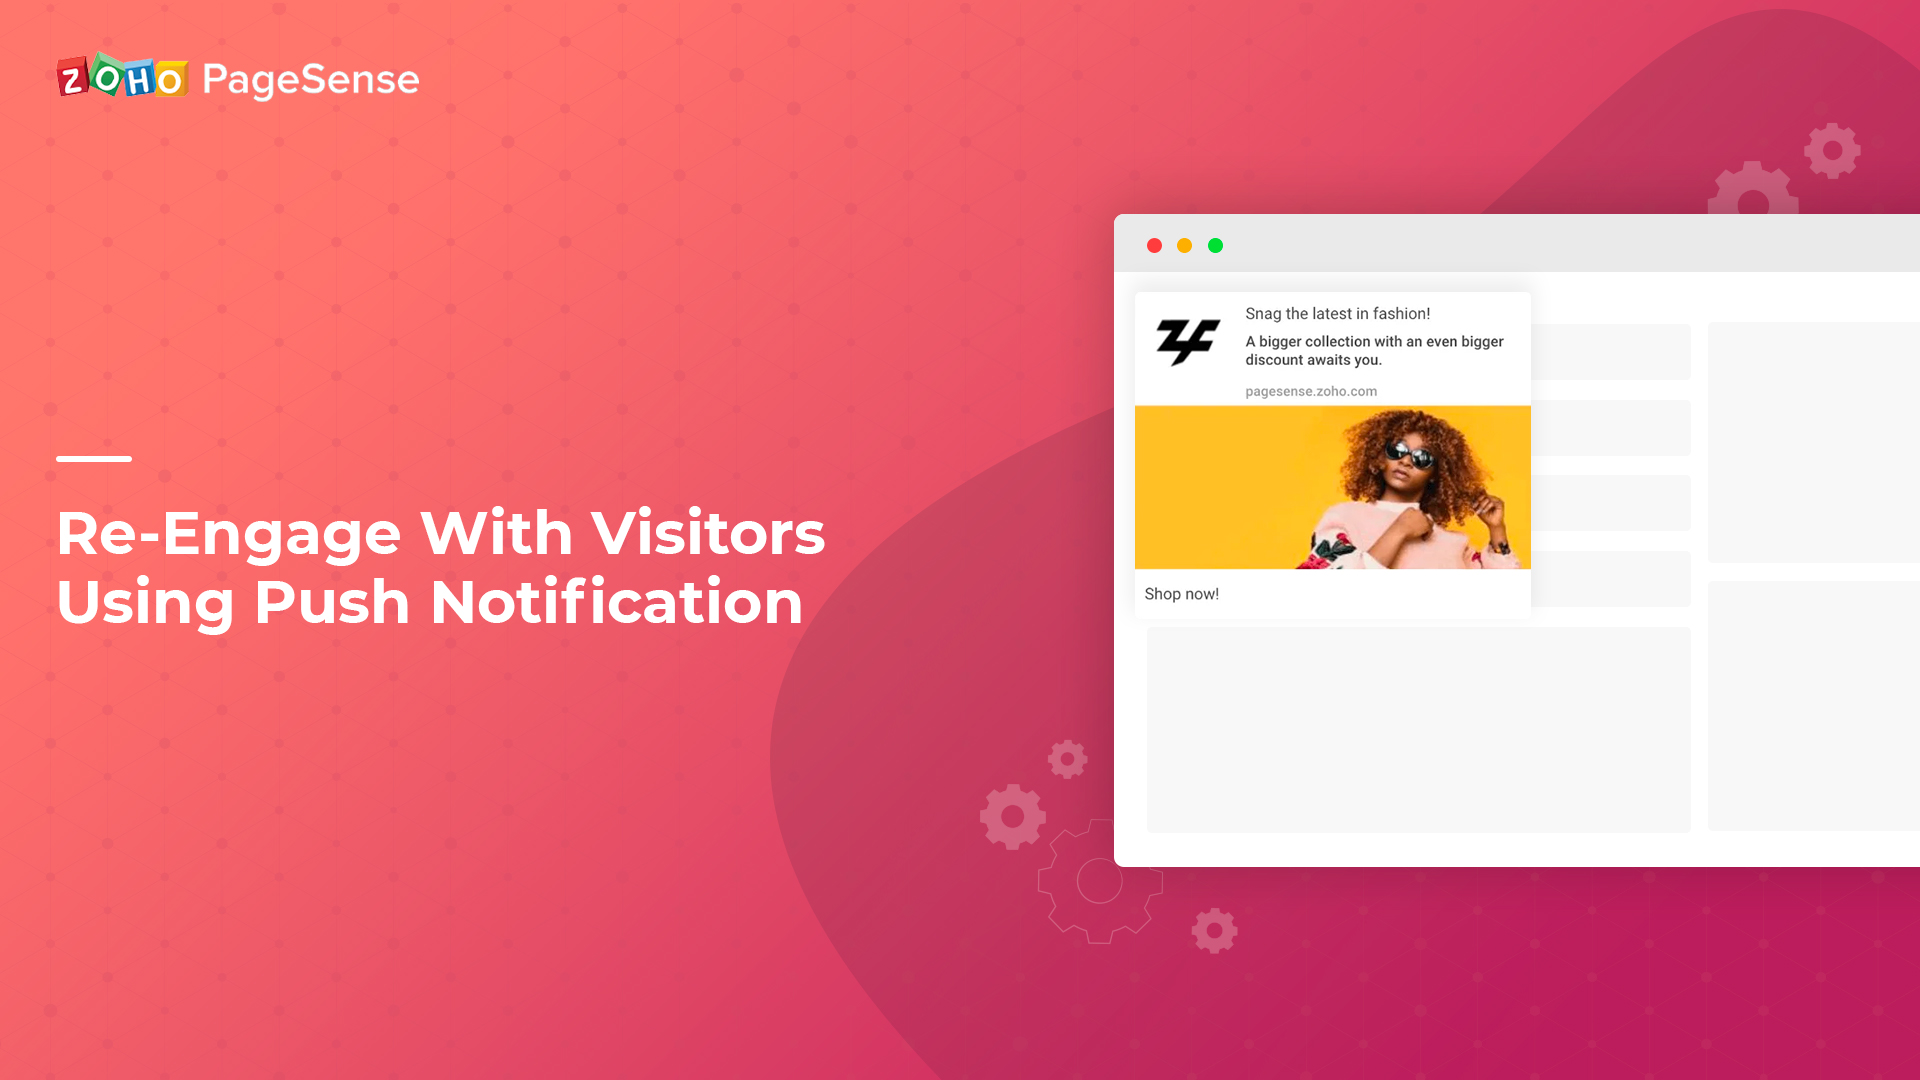 Re-Engage With Visitors Using Push Notification